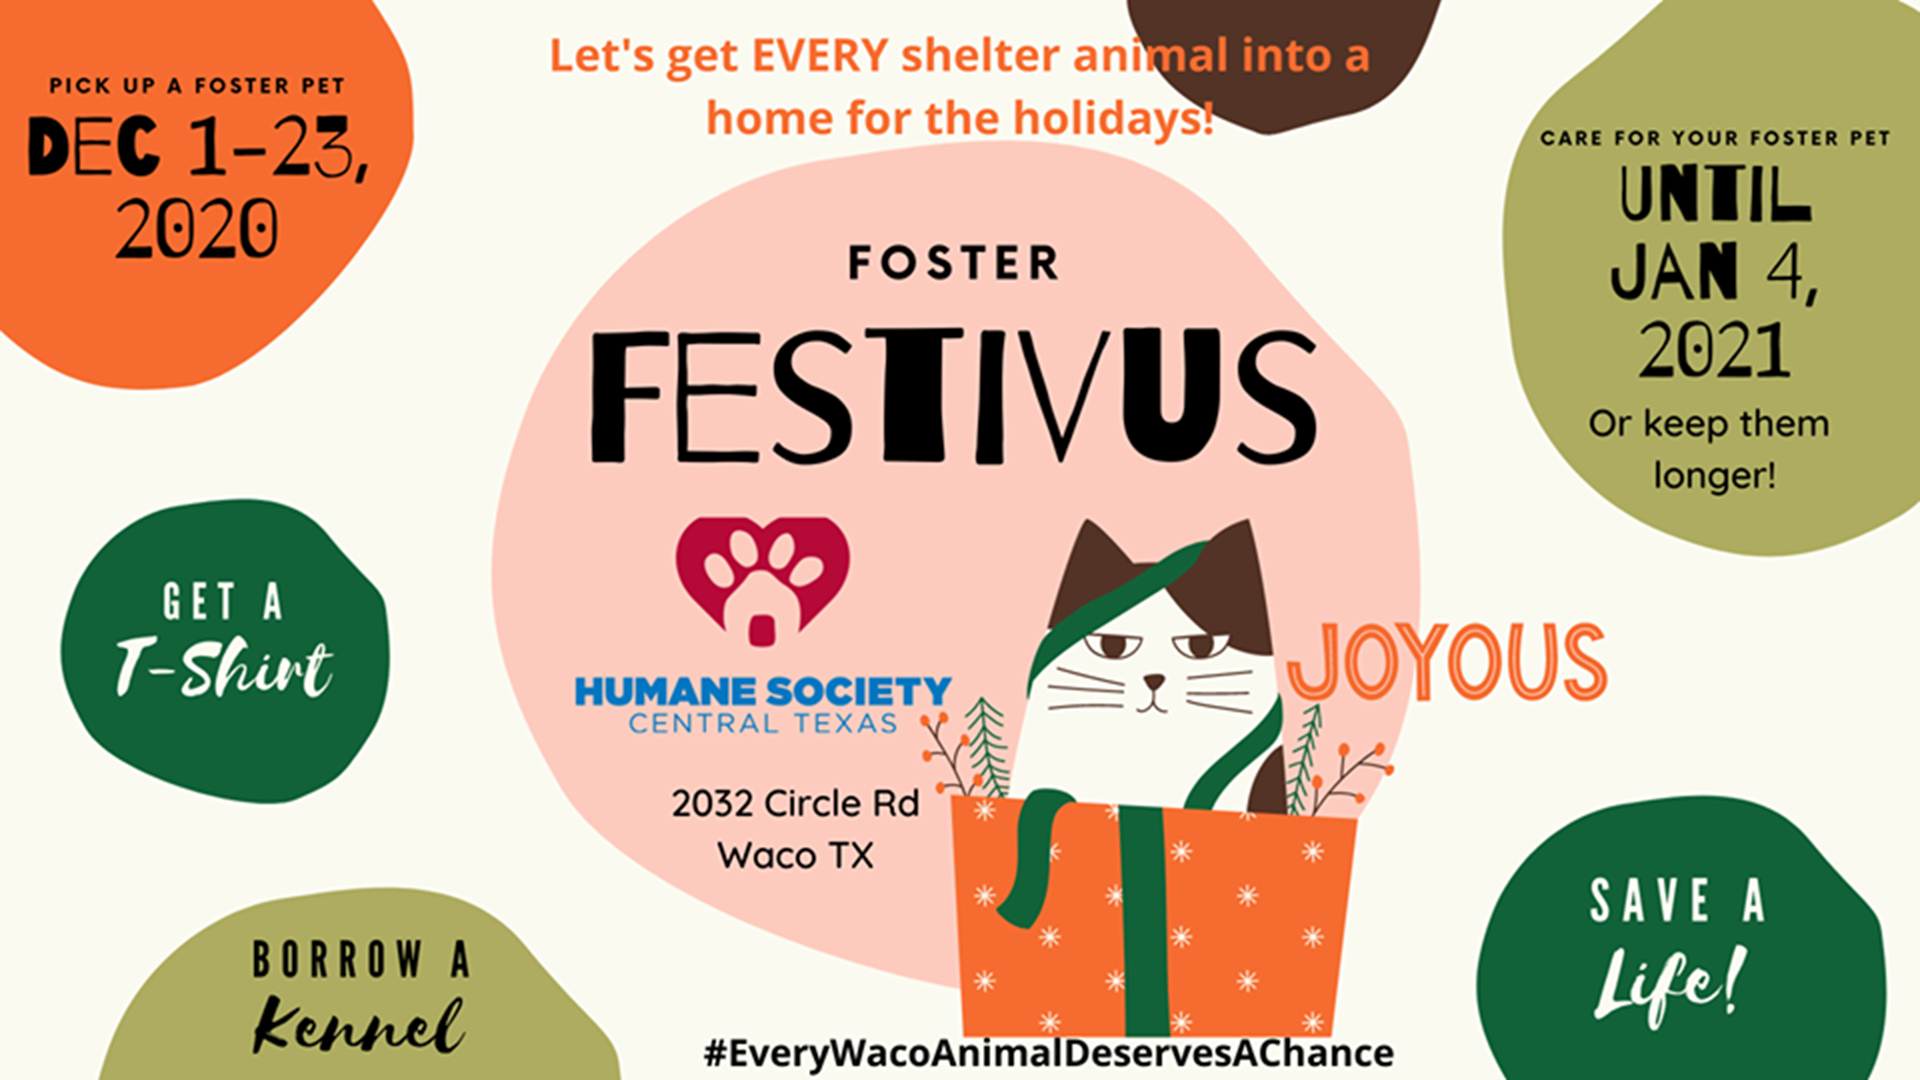 The Humane Society is hosting several events to raise awareness, including Foster Festivus, Yappy Hour and Sunday Funday.